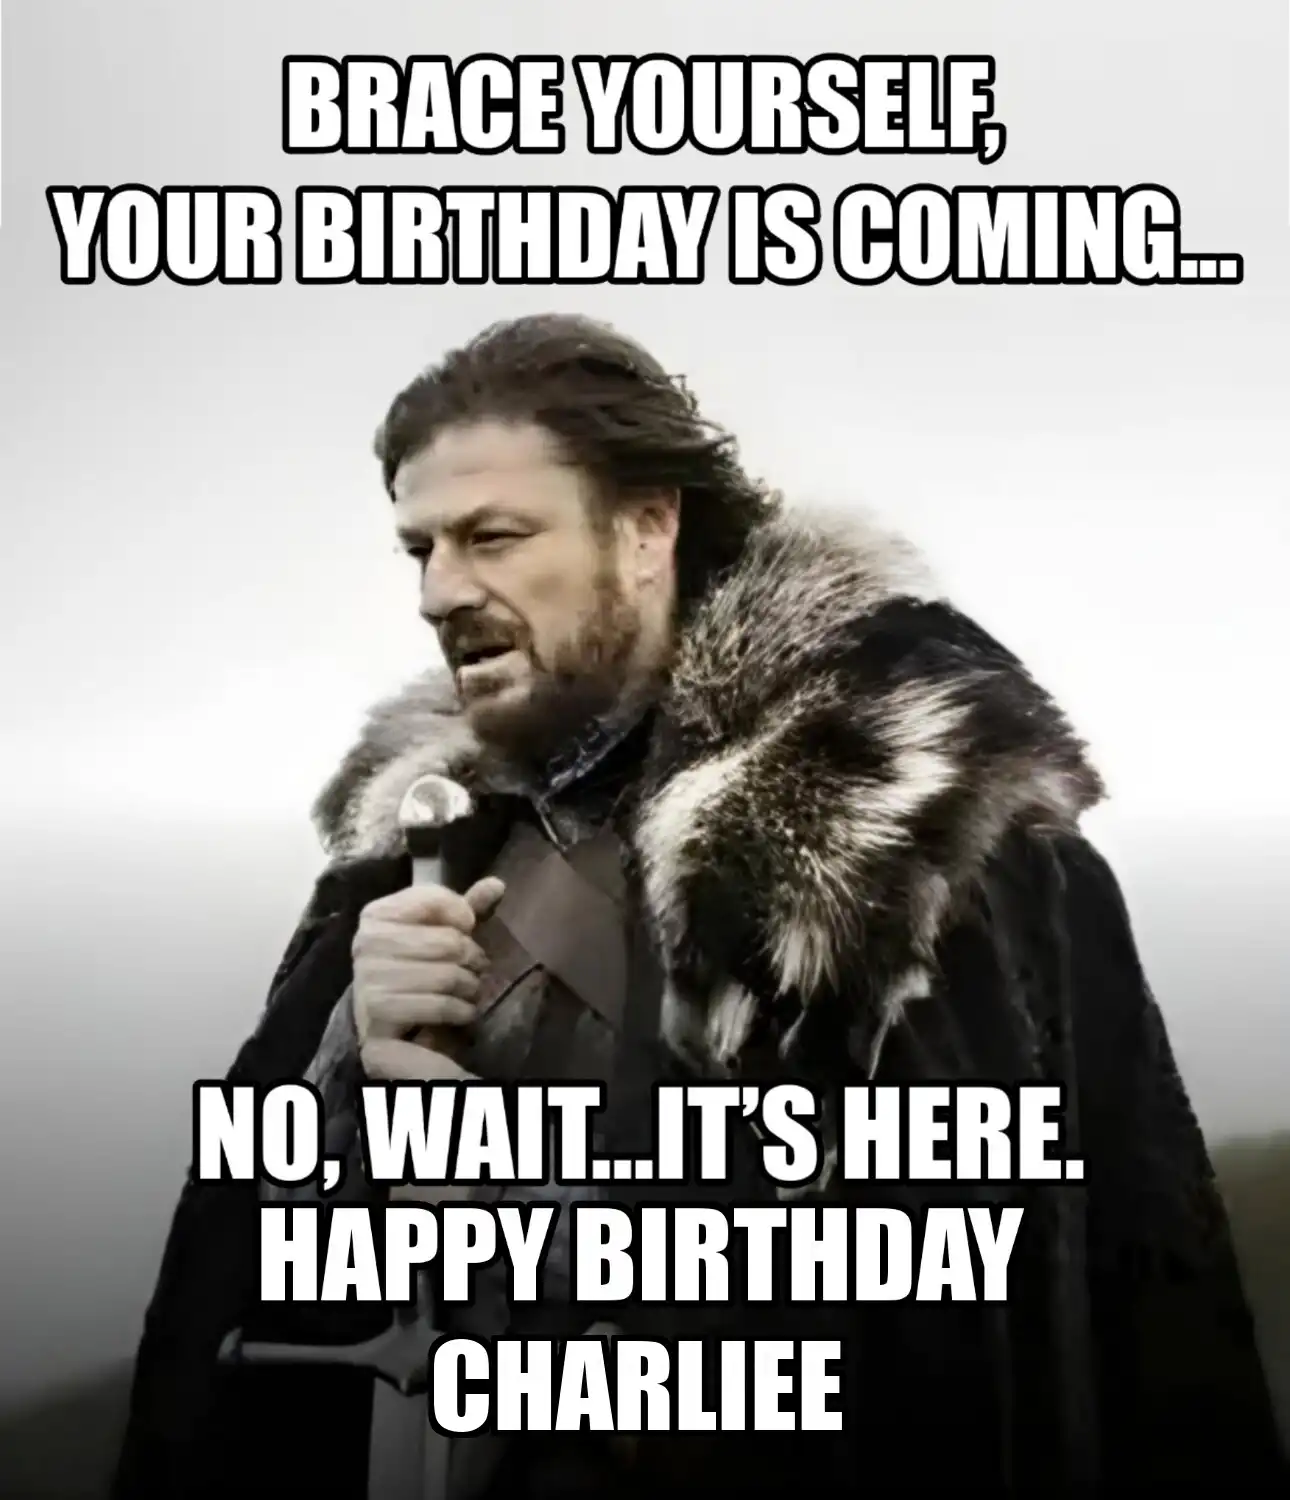 Happy Birthday Charliee Brace Yourself Your Birthday Is Coming Meme